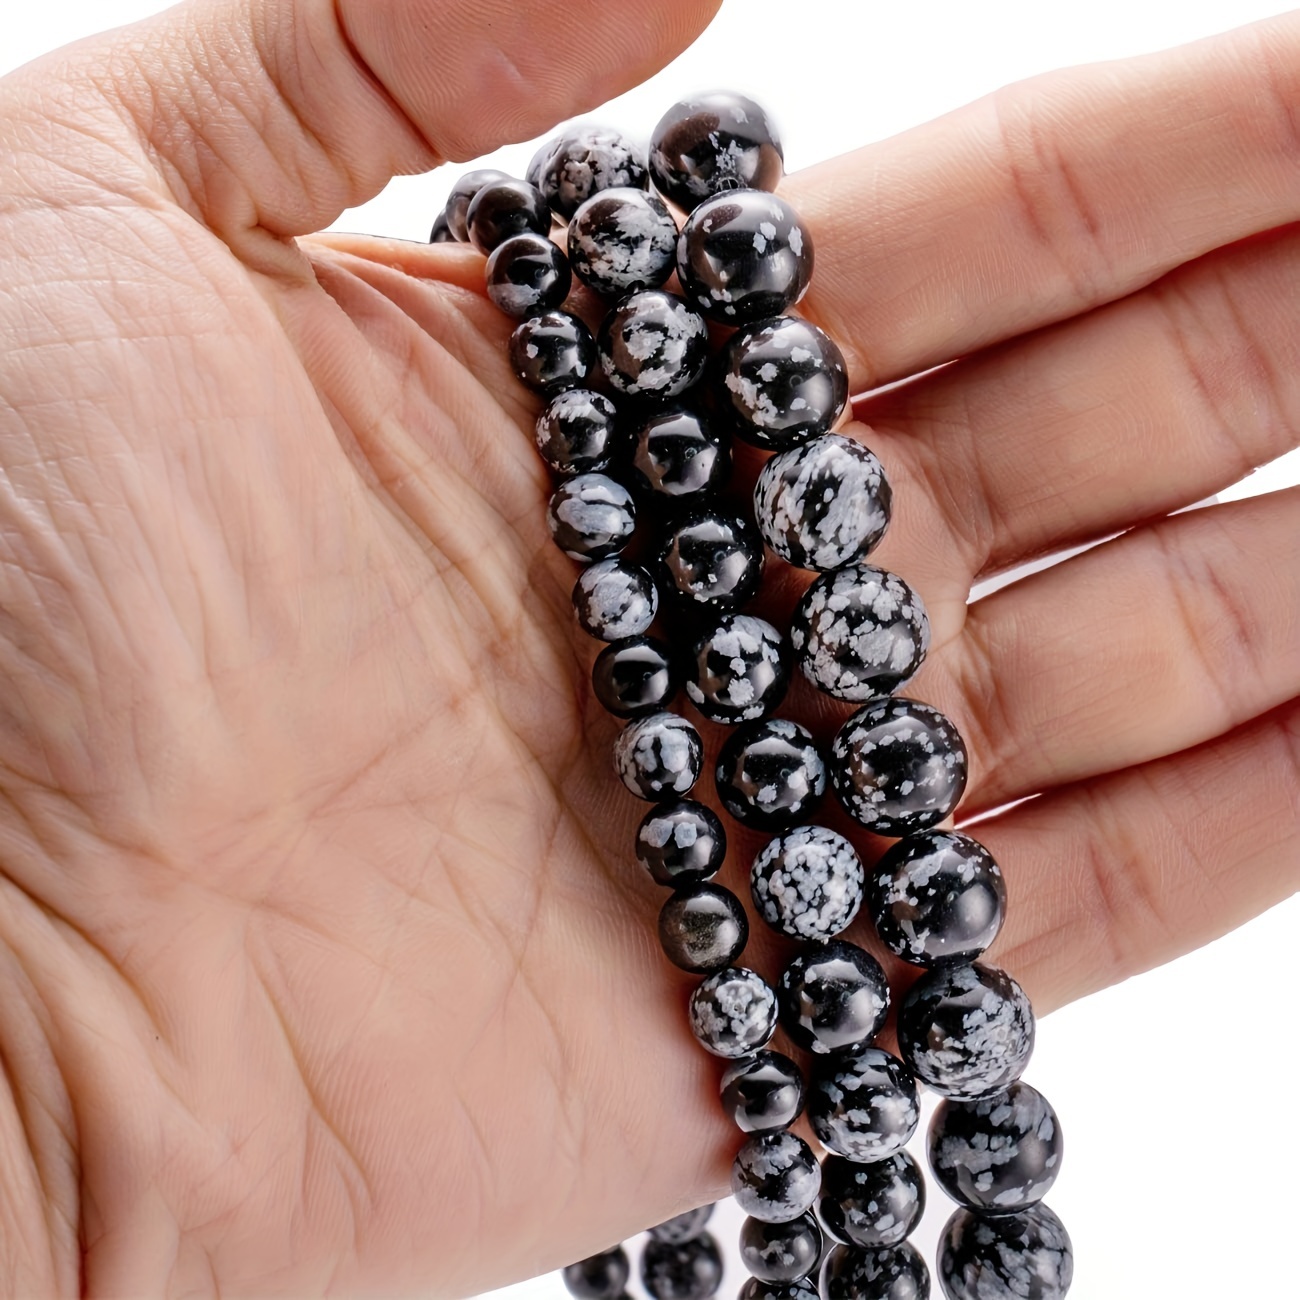 8mm Natural Black Obsidian Beads Round Gemstone Loose Beads for Jewelry Making (45-48pcs/strand)